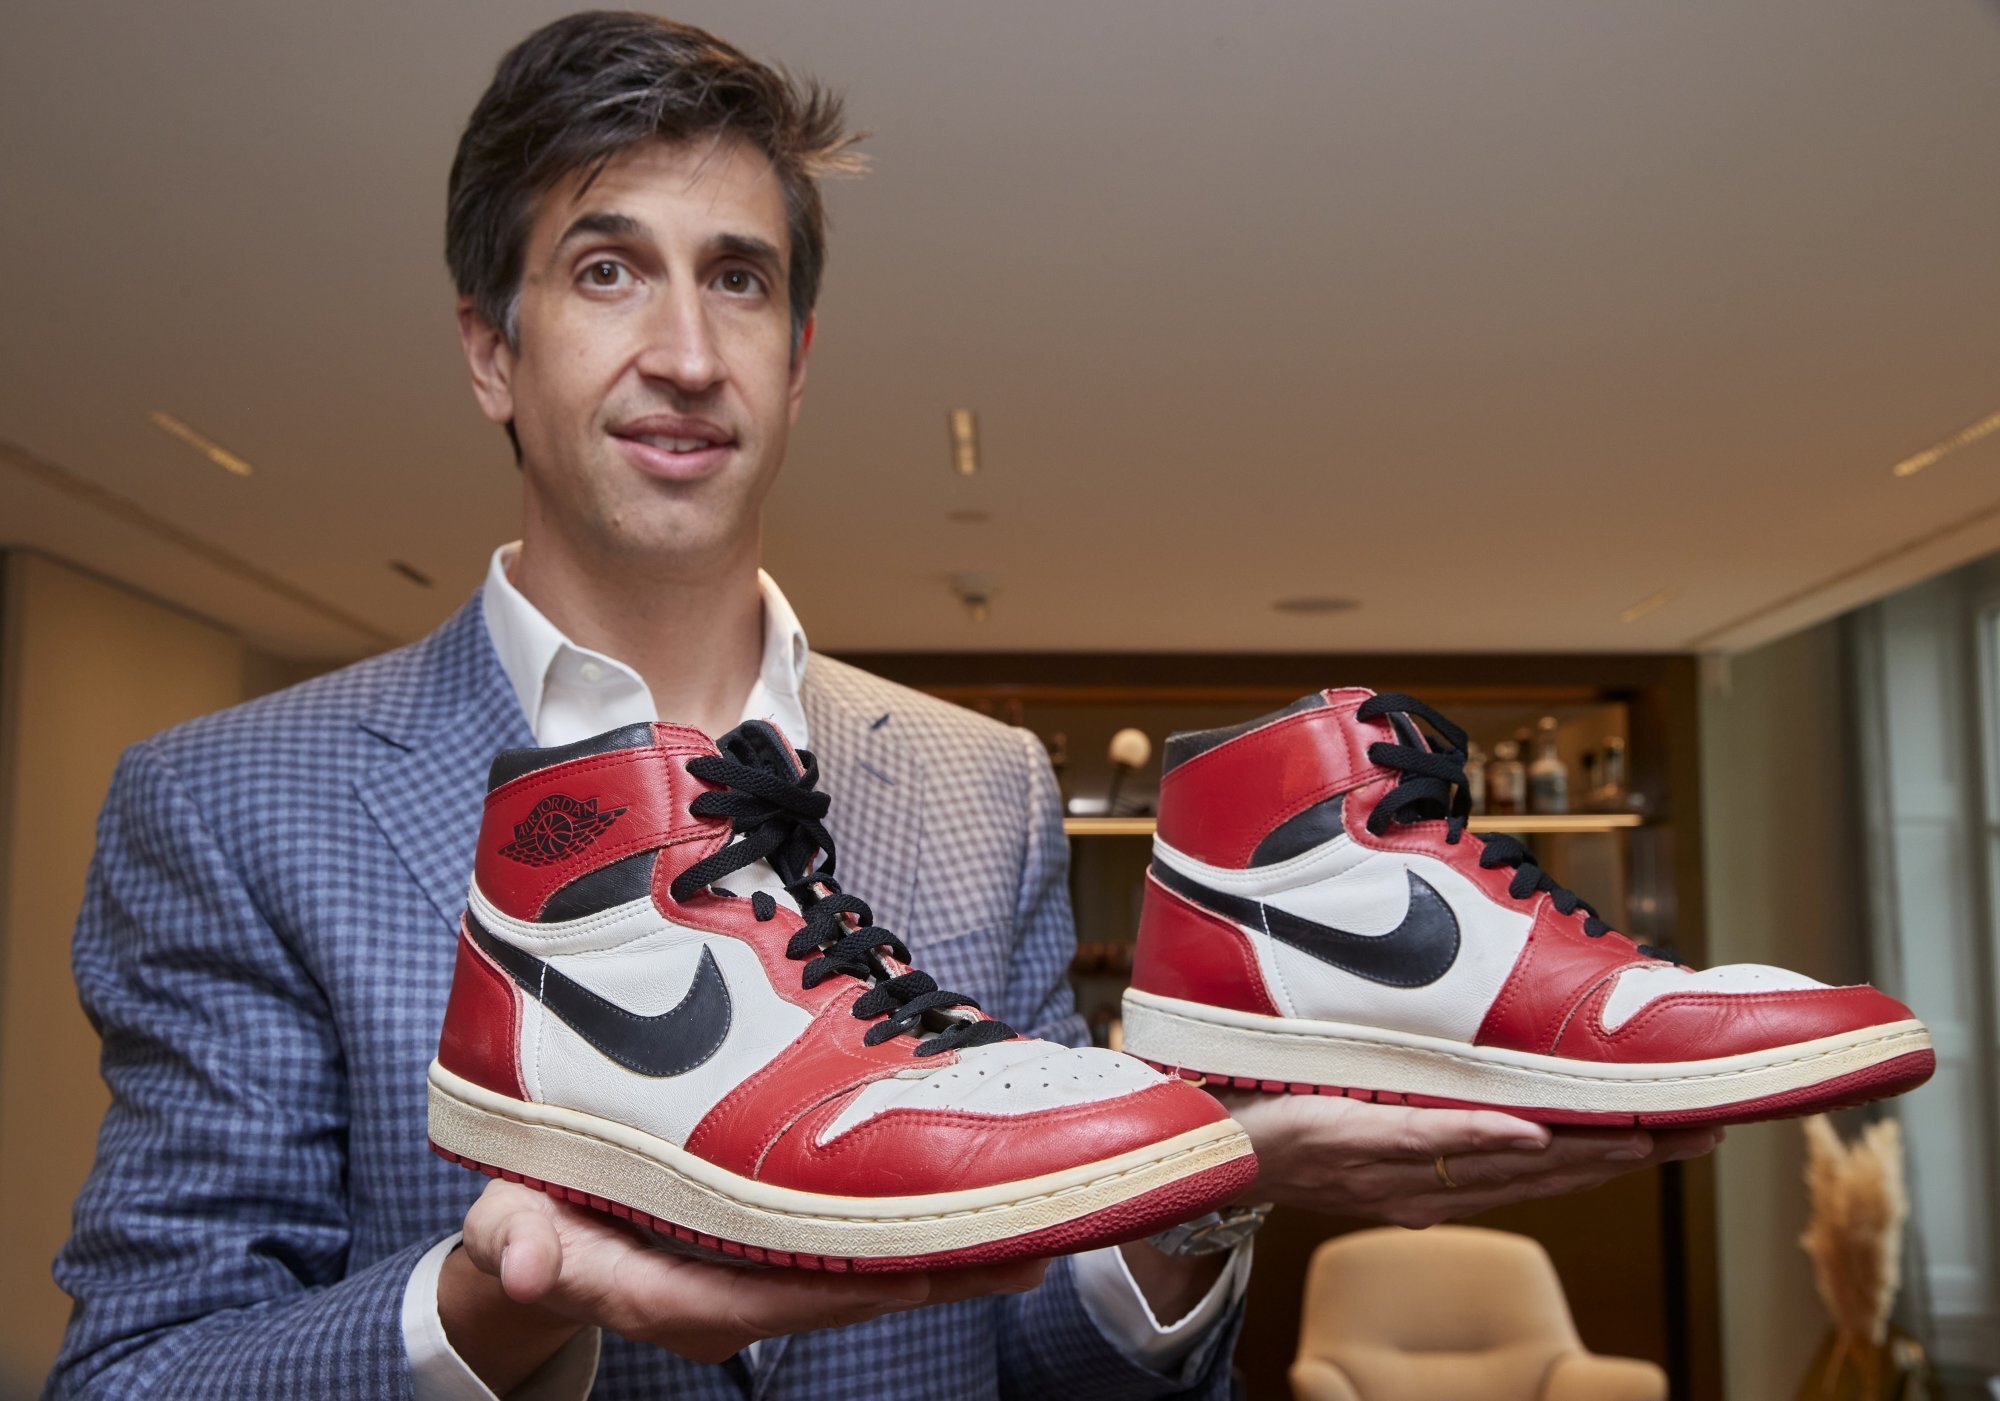 The 20 Most Expensive Sneakers Ever Made  Most expensive sneakers, Expensive  sneakers, Sneakers